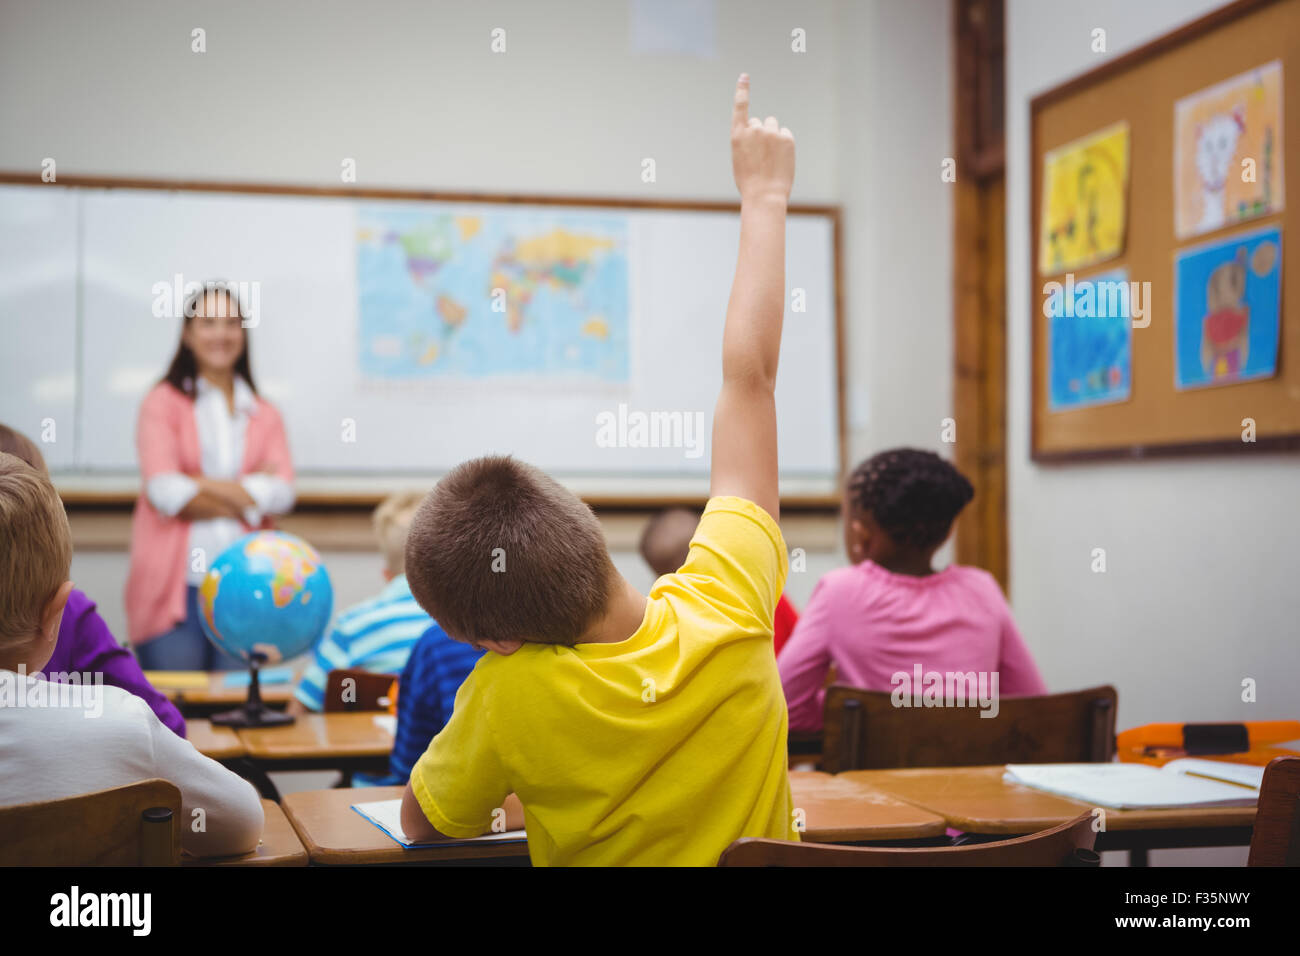 Student raising hand to ask a question Stock Photo